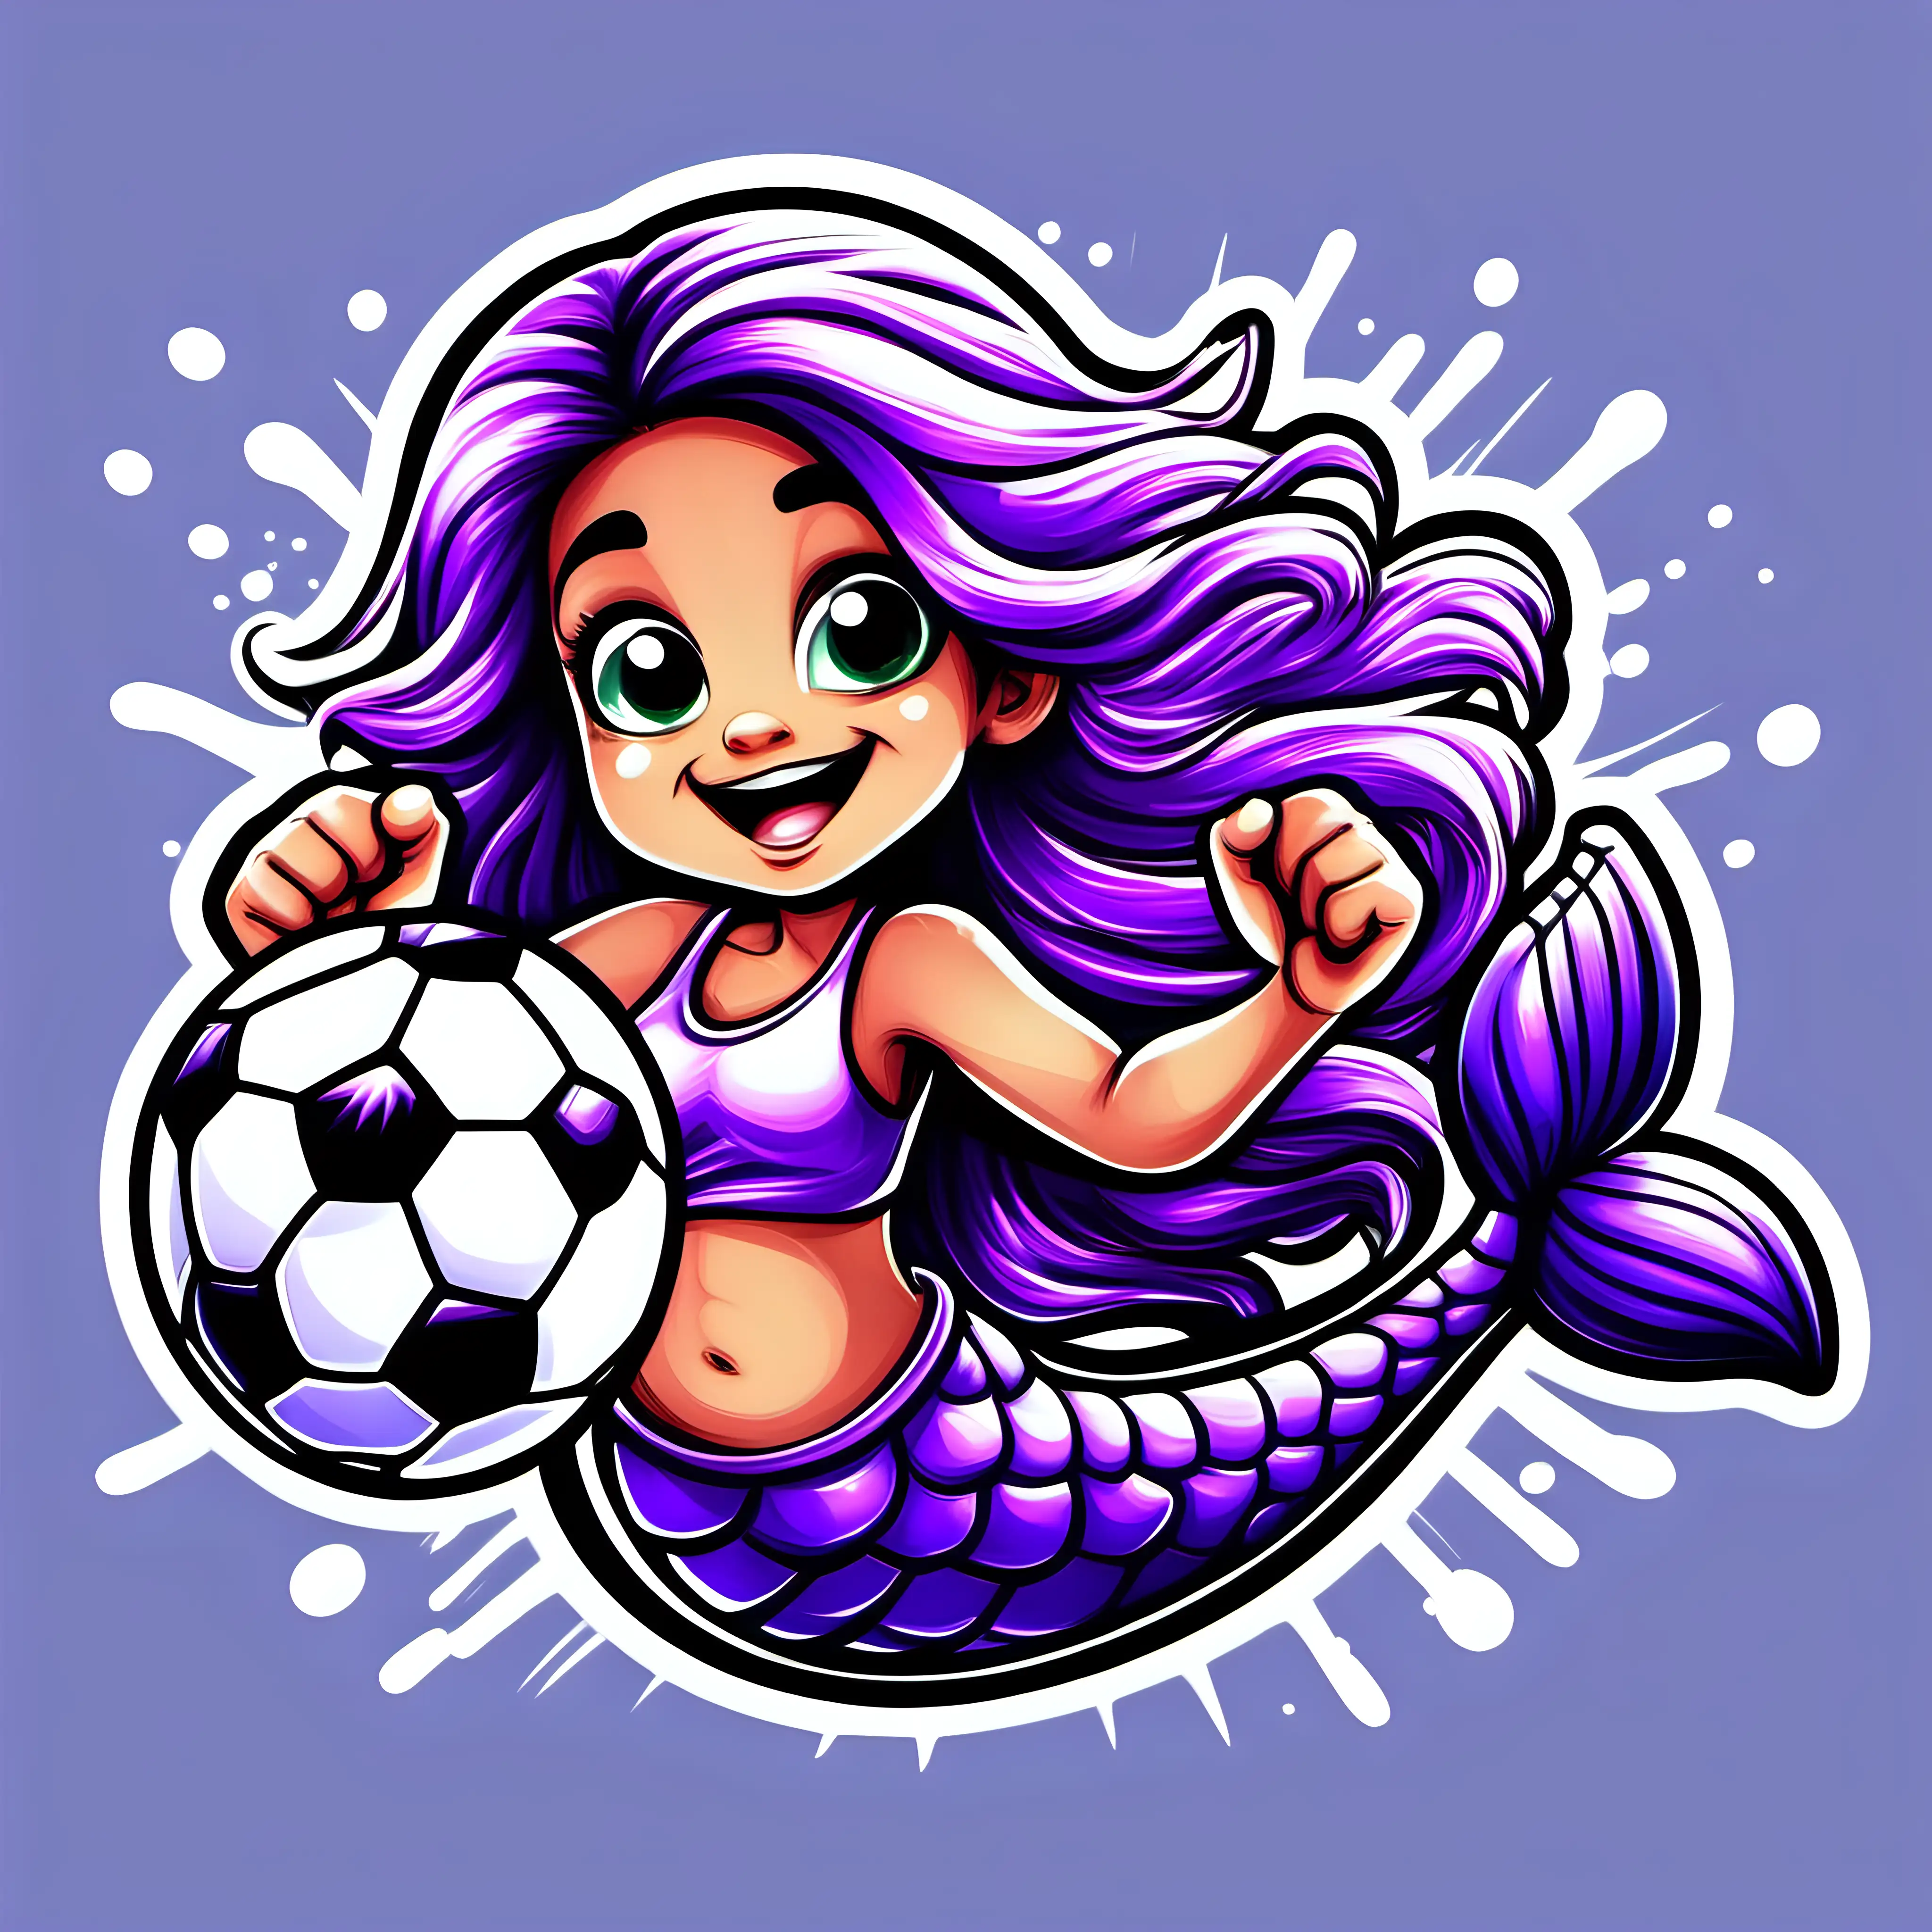 Cheerful Mermaid and Child Celebrating Soccer Victory in Cartoon Style